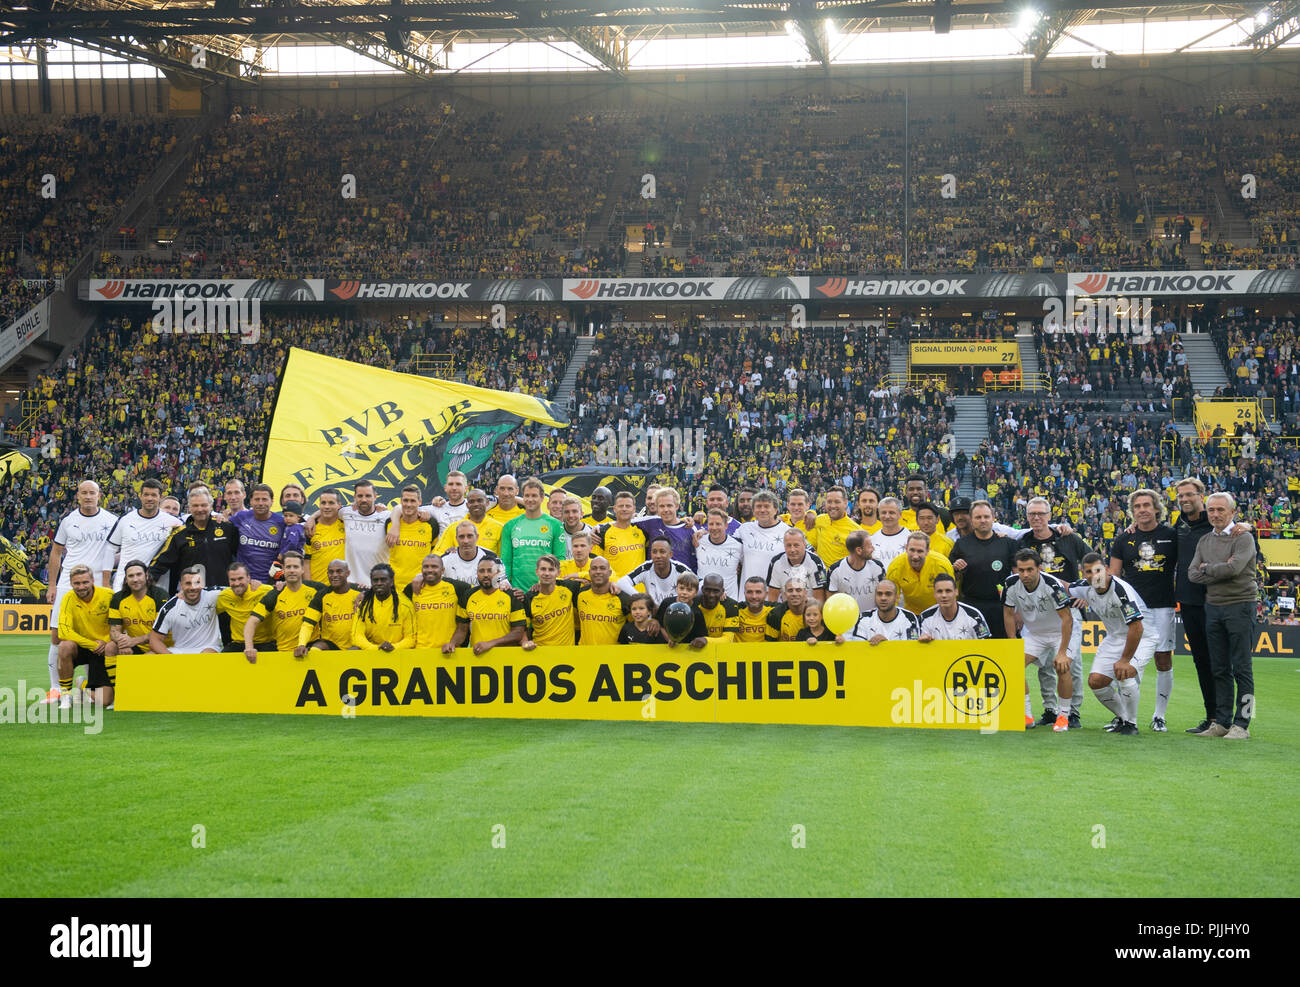 Dortmund, Germany. 07th Sep, 2018. Soccer: Roman Weidenfeller and both teams line up for a group photo before his farewell match. Credit: Bernd Thissen/dpa/Alamy Live News Stock Photo